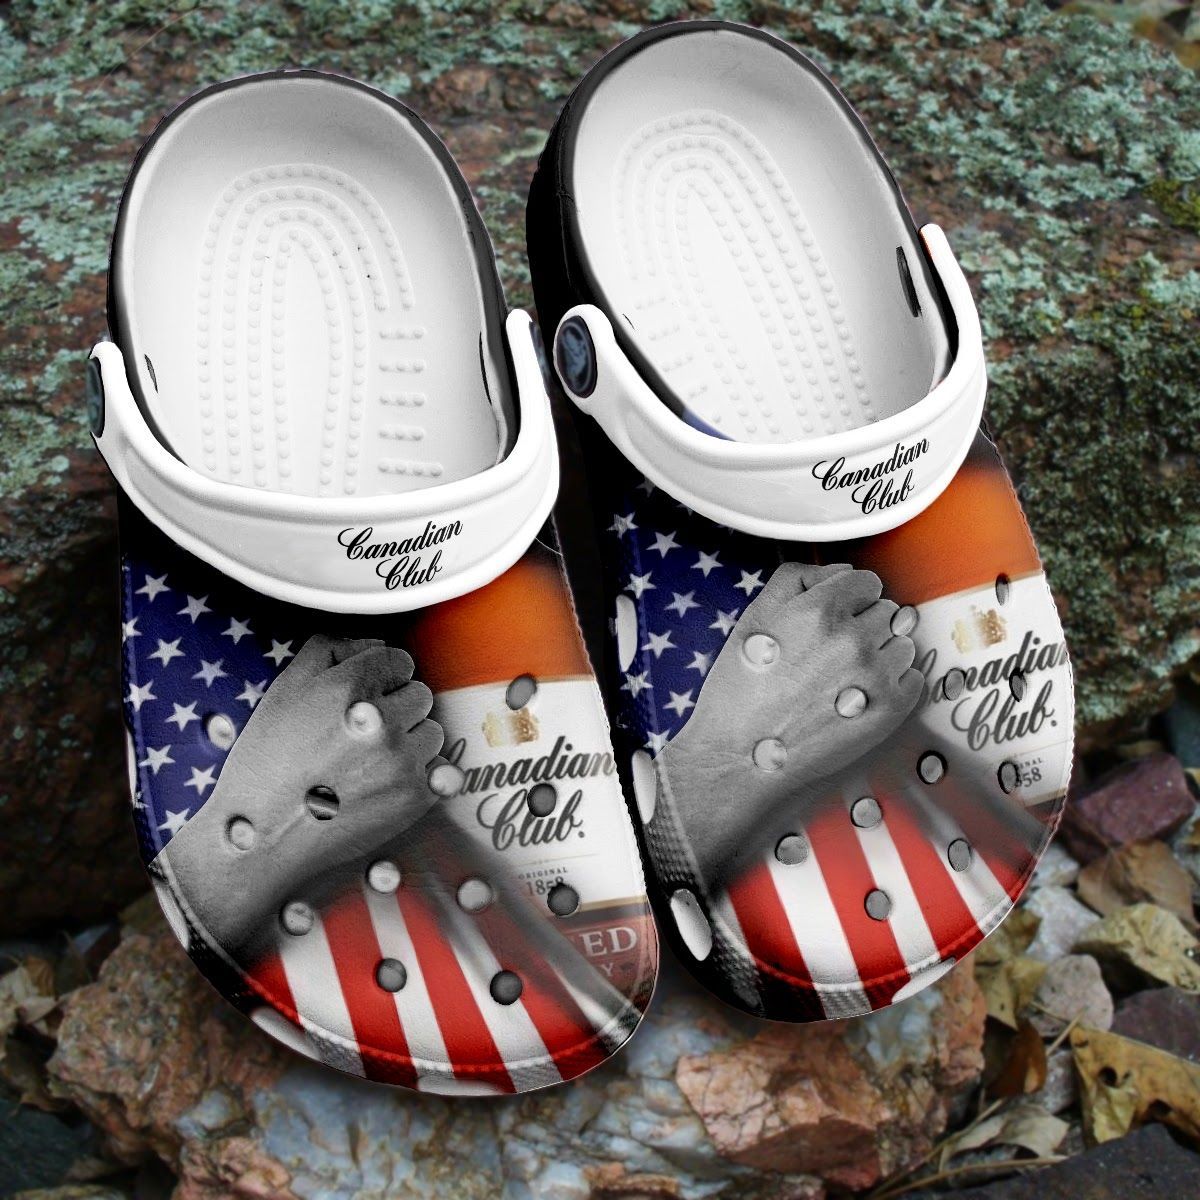 If you'd like to purchase a pair of Crocband Clogs, be sure to check out the official website. 145